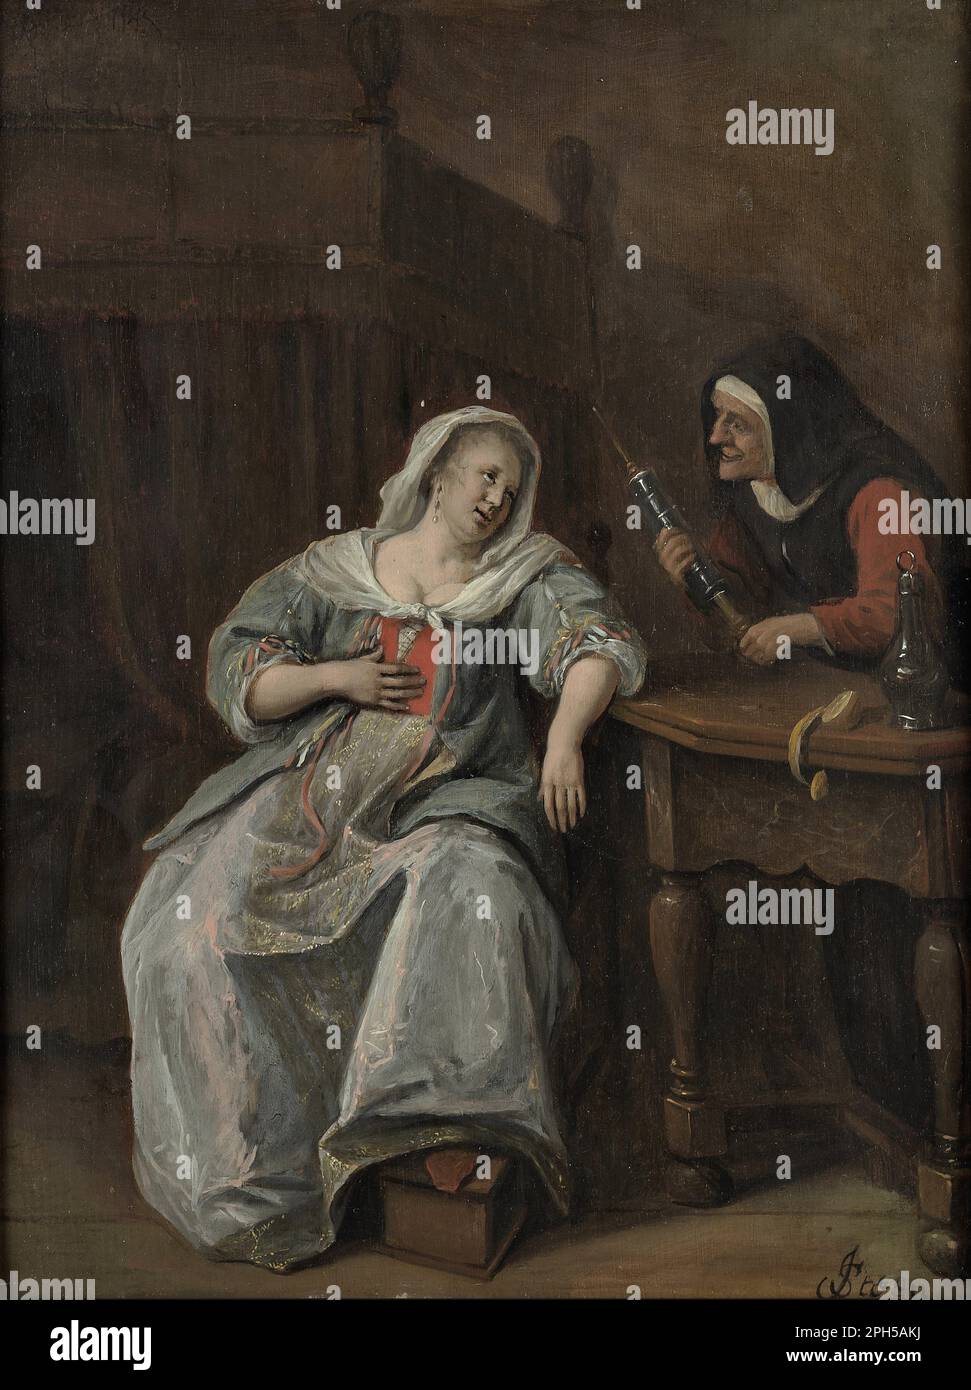 The Sick Woman between circa 1660 and circa 1670 by Jan Steen Stock Photo